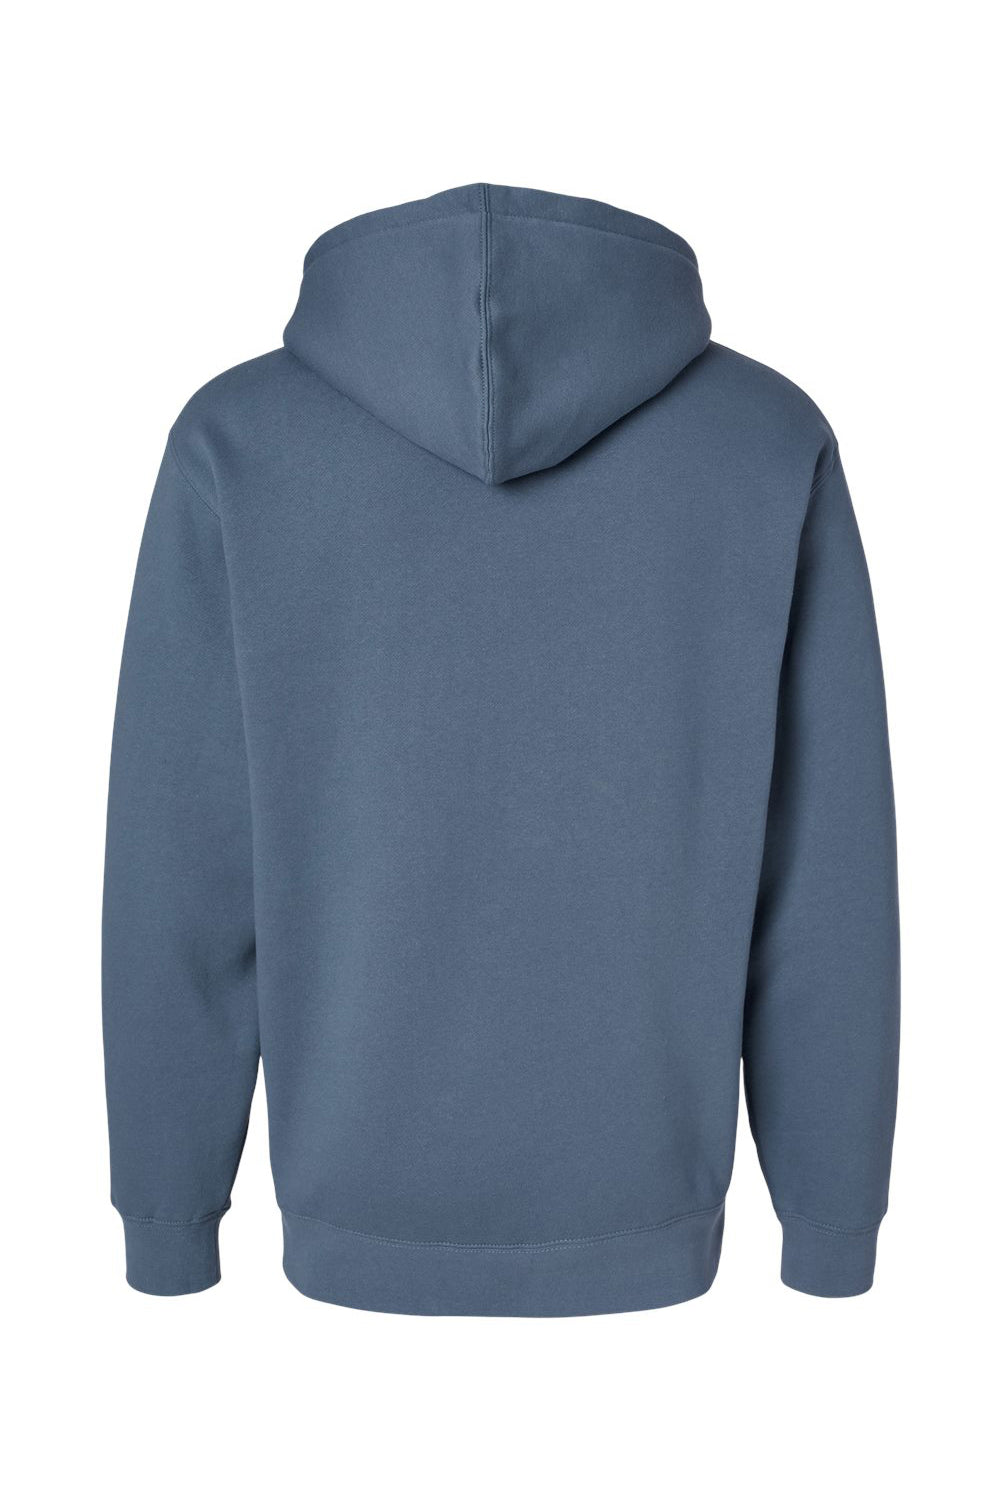 Independent Trading Co. IND4000 Mens Hooded Sweatshirt Hoodie Storm Blue Flat Back